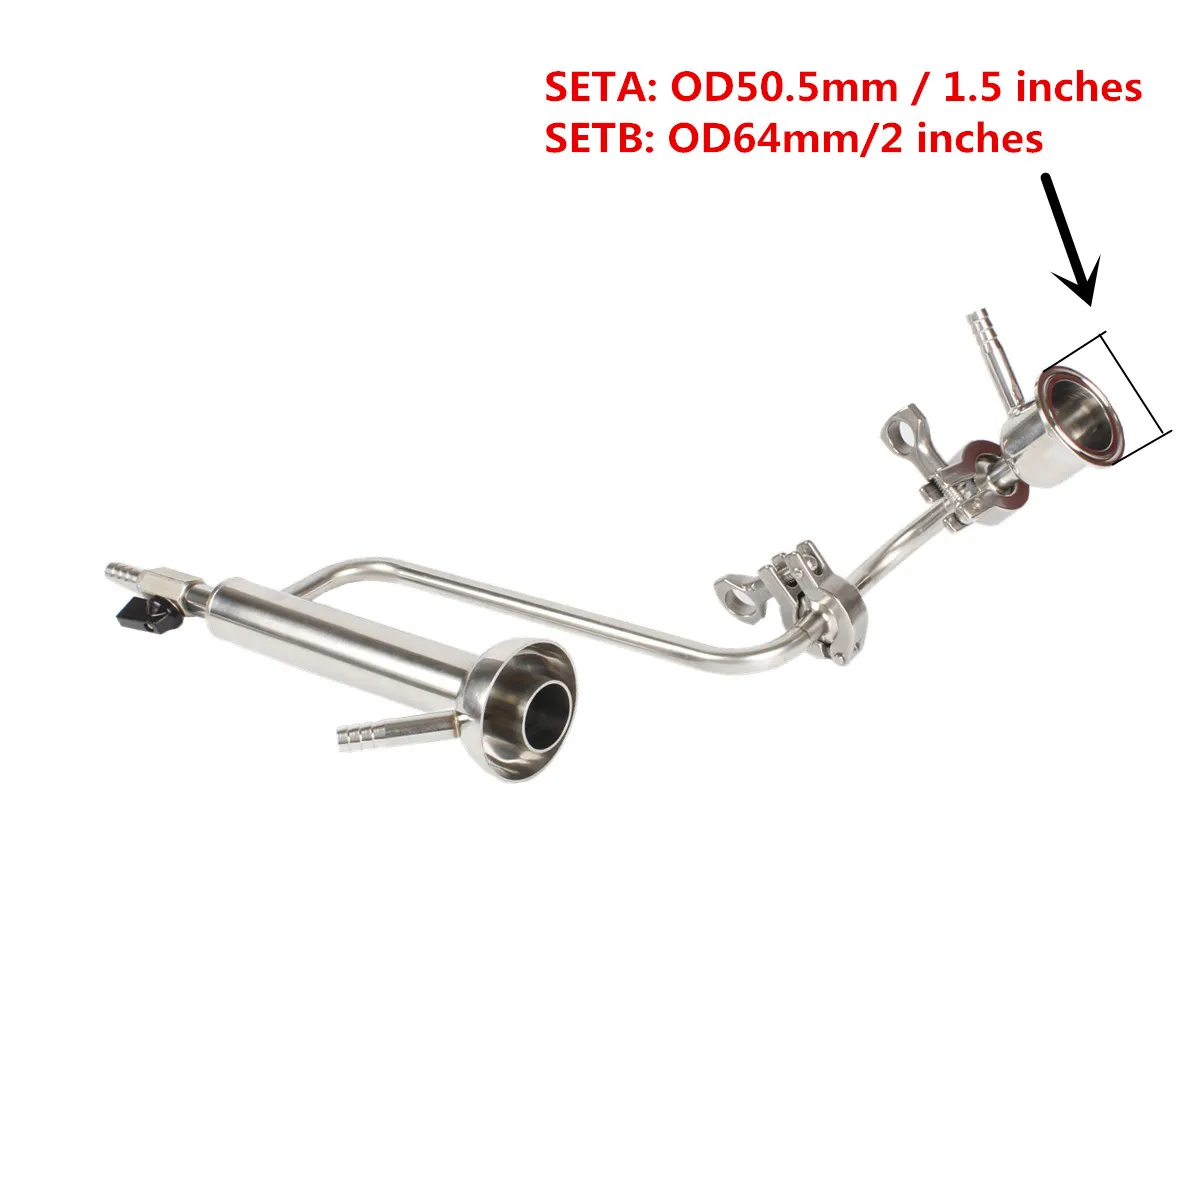 

Alcohol Tri Distiller. Connection Clamp Stainless Mm For 304 Steel Parrot Continuous Measurement